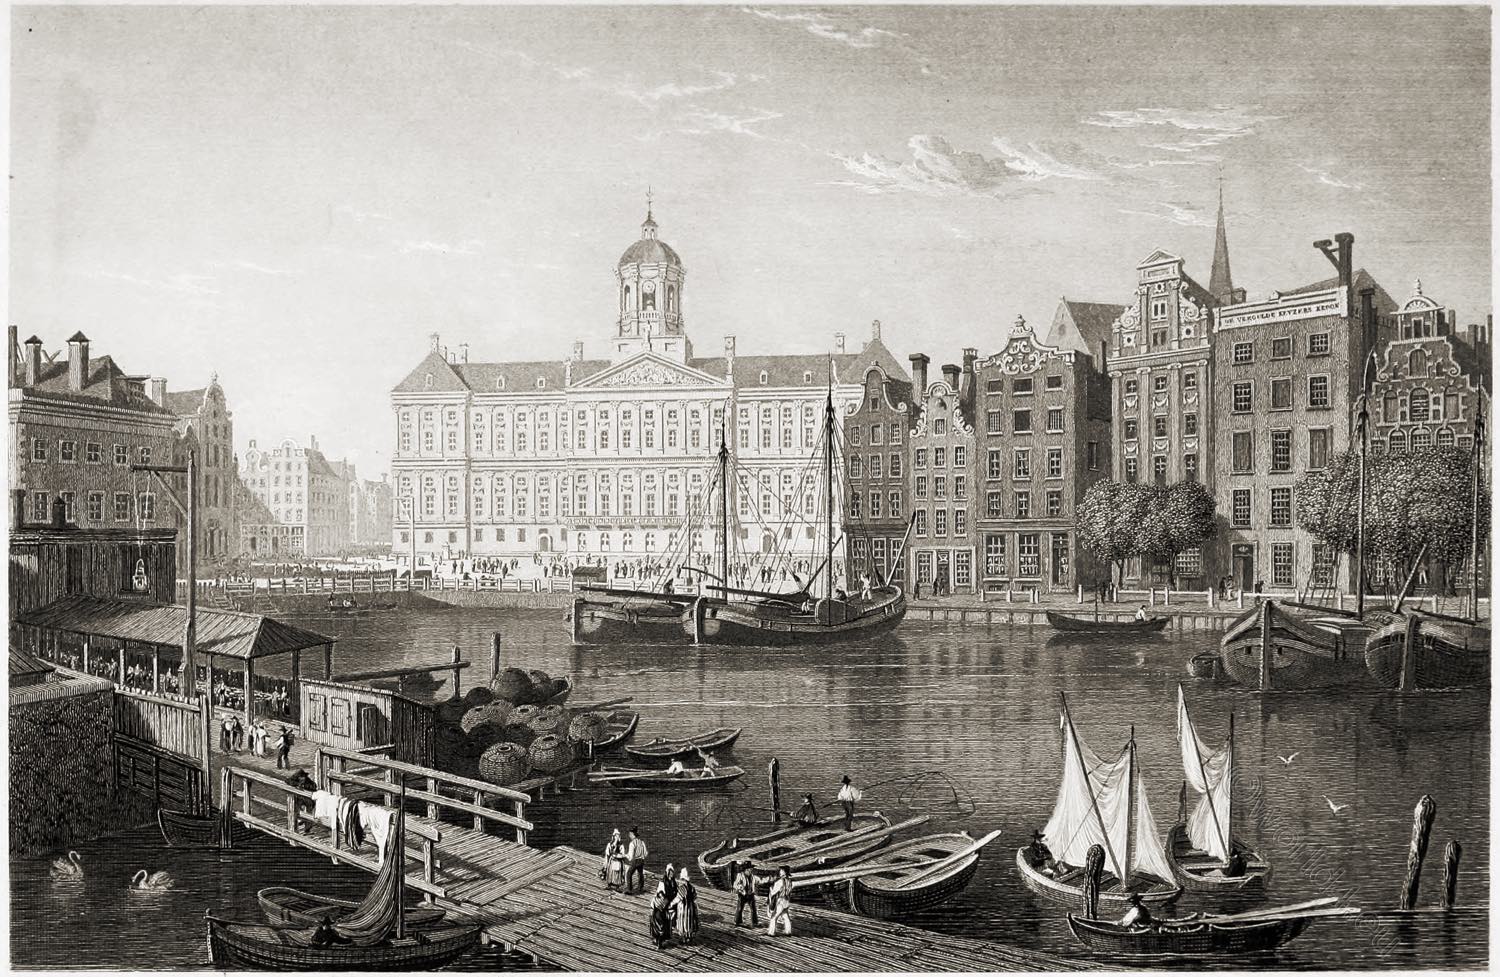 Amsterdam. The Damrak Palace &c. rendered very picturesque.